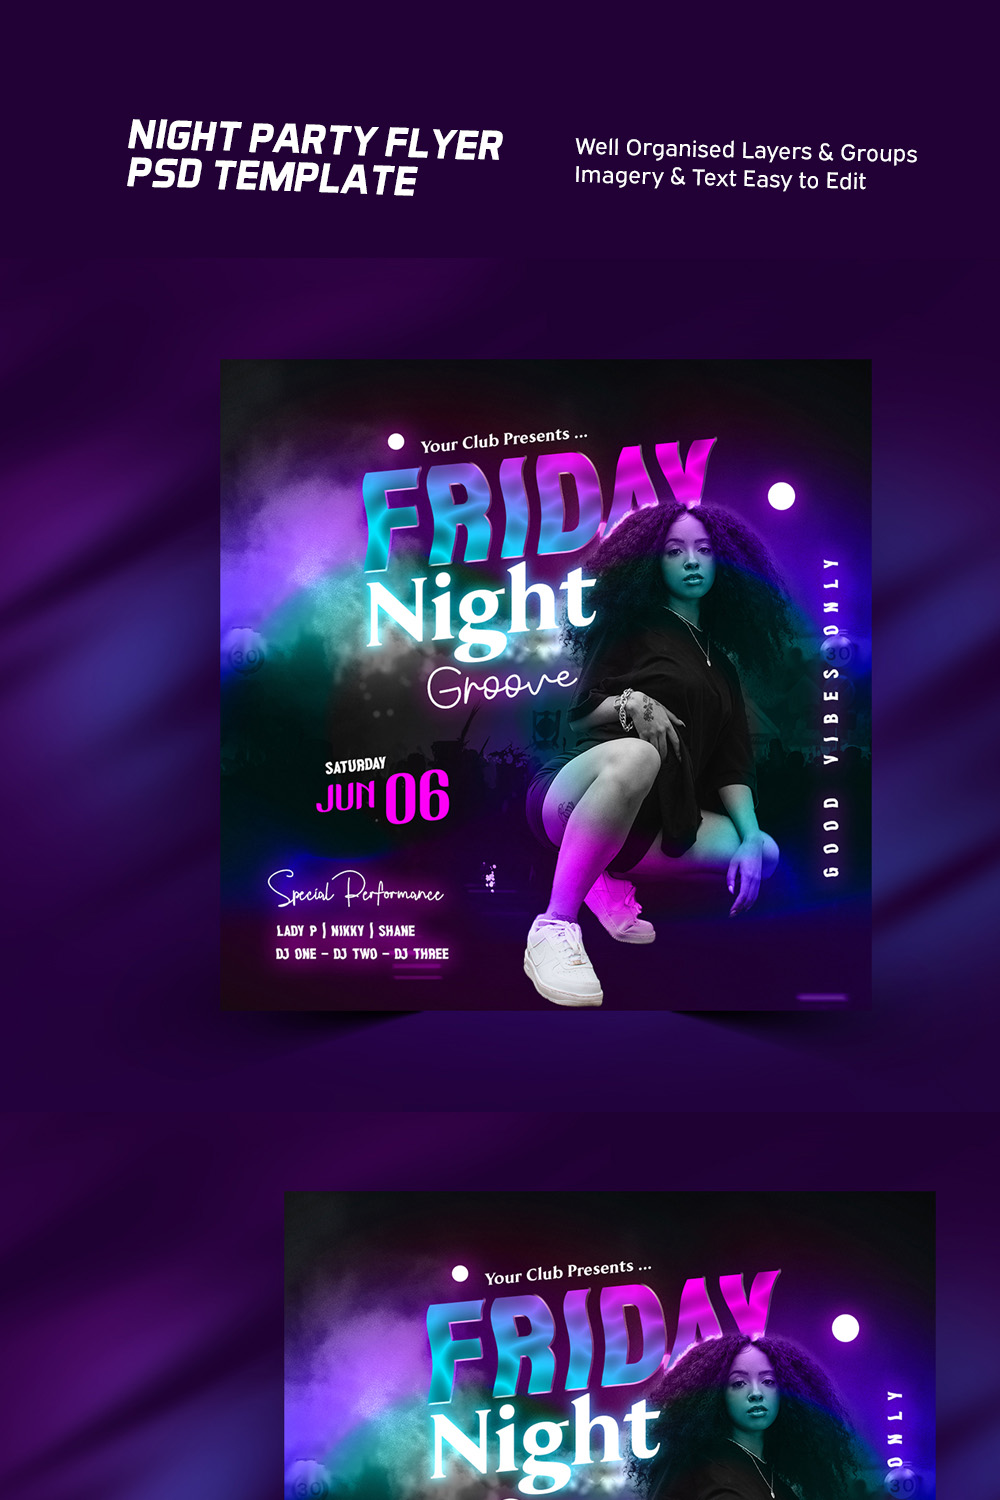 Night Party Flyer - Event Flyer PSD Template pinterest preview image.